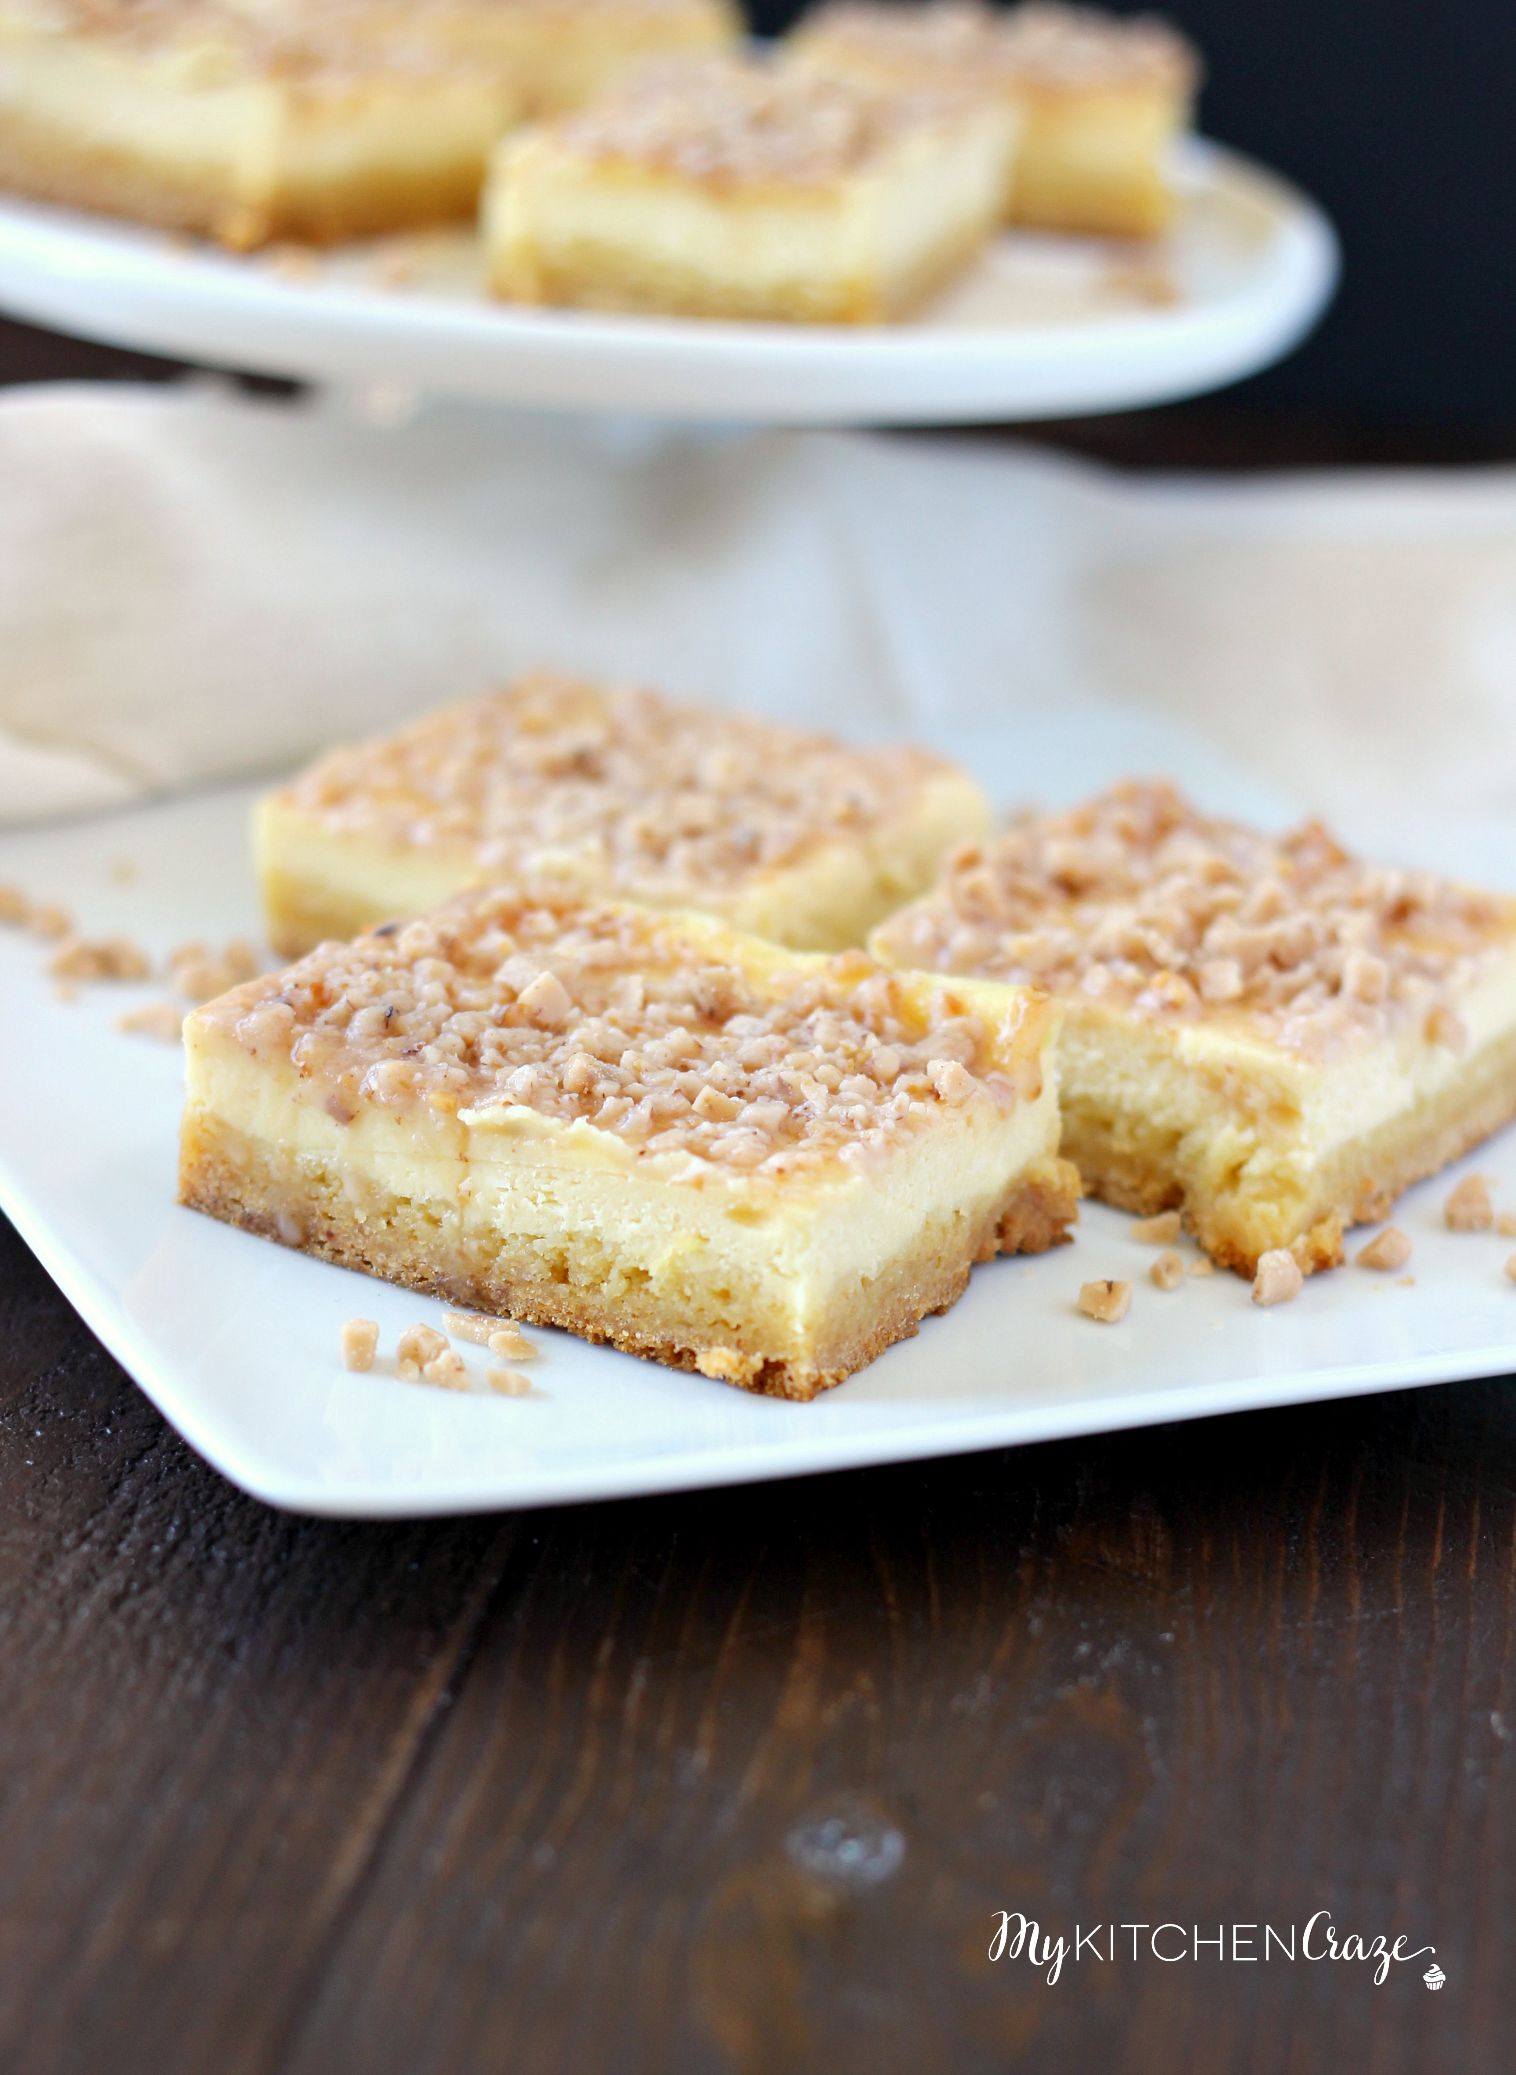 Toffee Cheesecake Bars ~ mykitchencraze ~ These bars are not only easy to throw together, but taste amazing! Sugar cookie bottom. Topped with a creamy cheesecake and sprinkled with toffee bits. What more could you ask for?